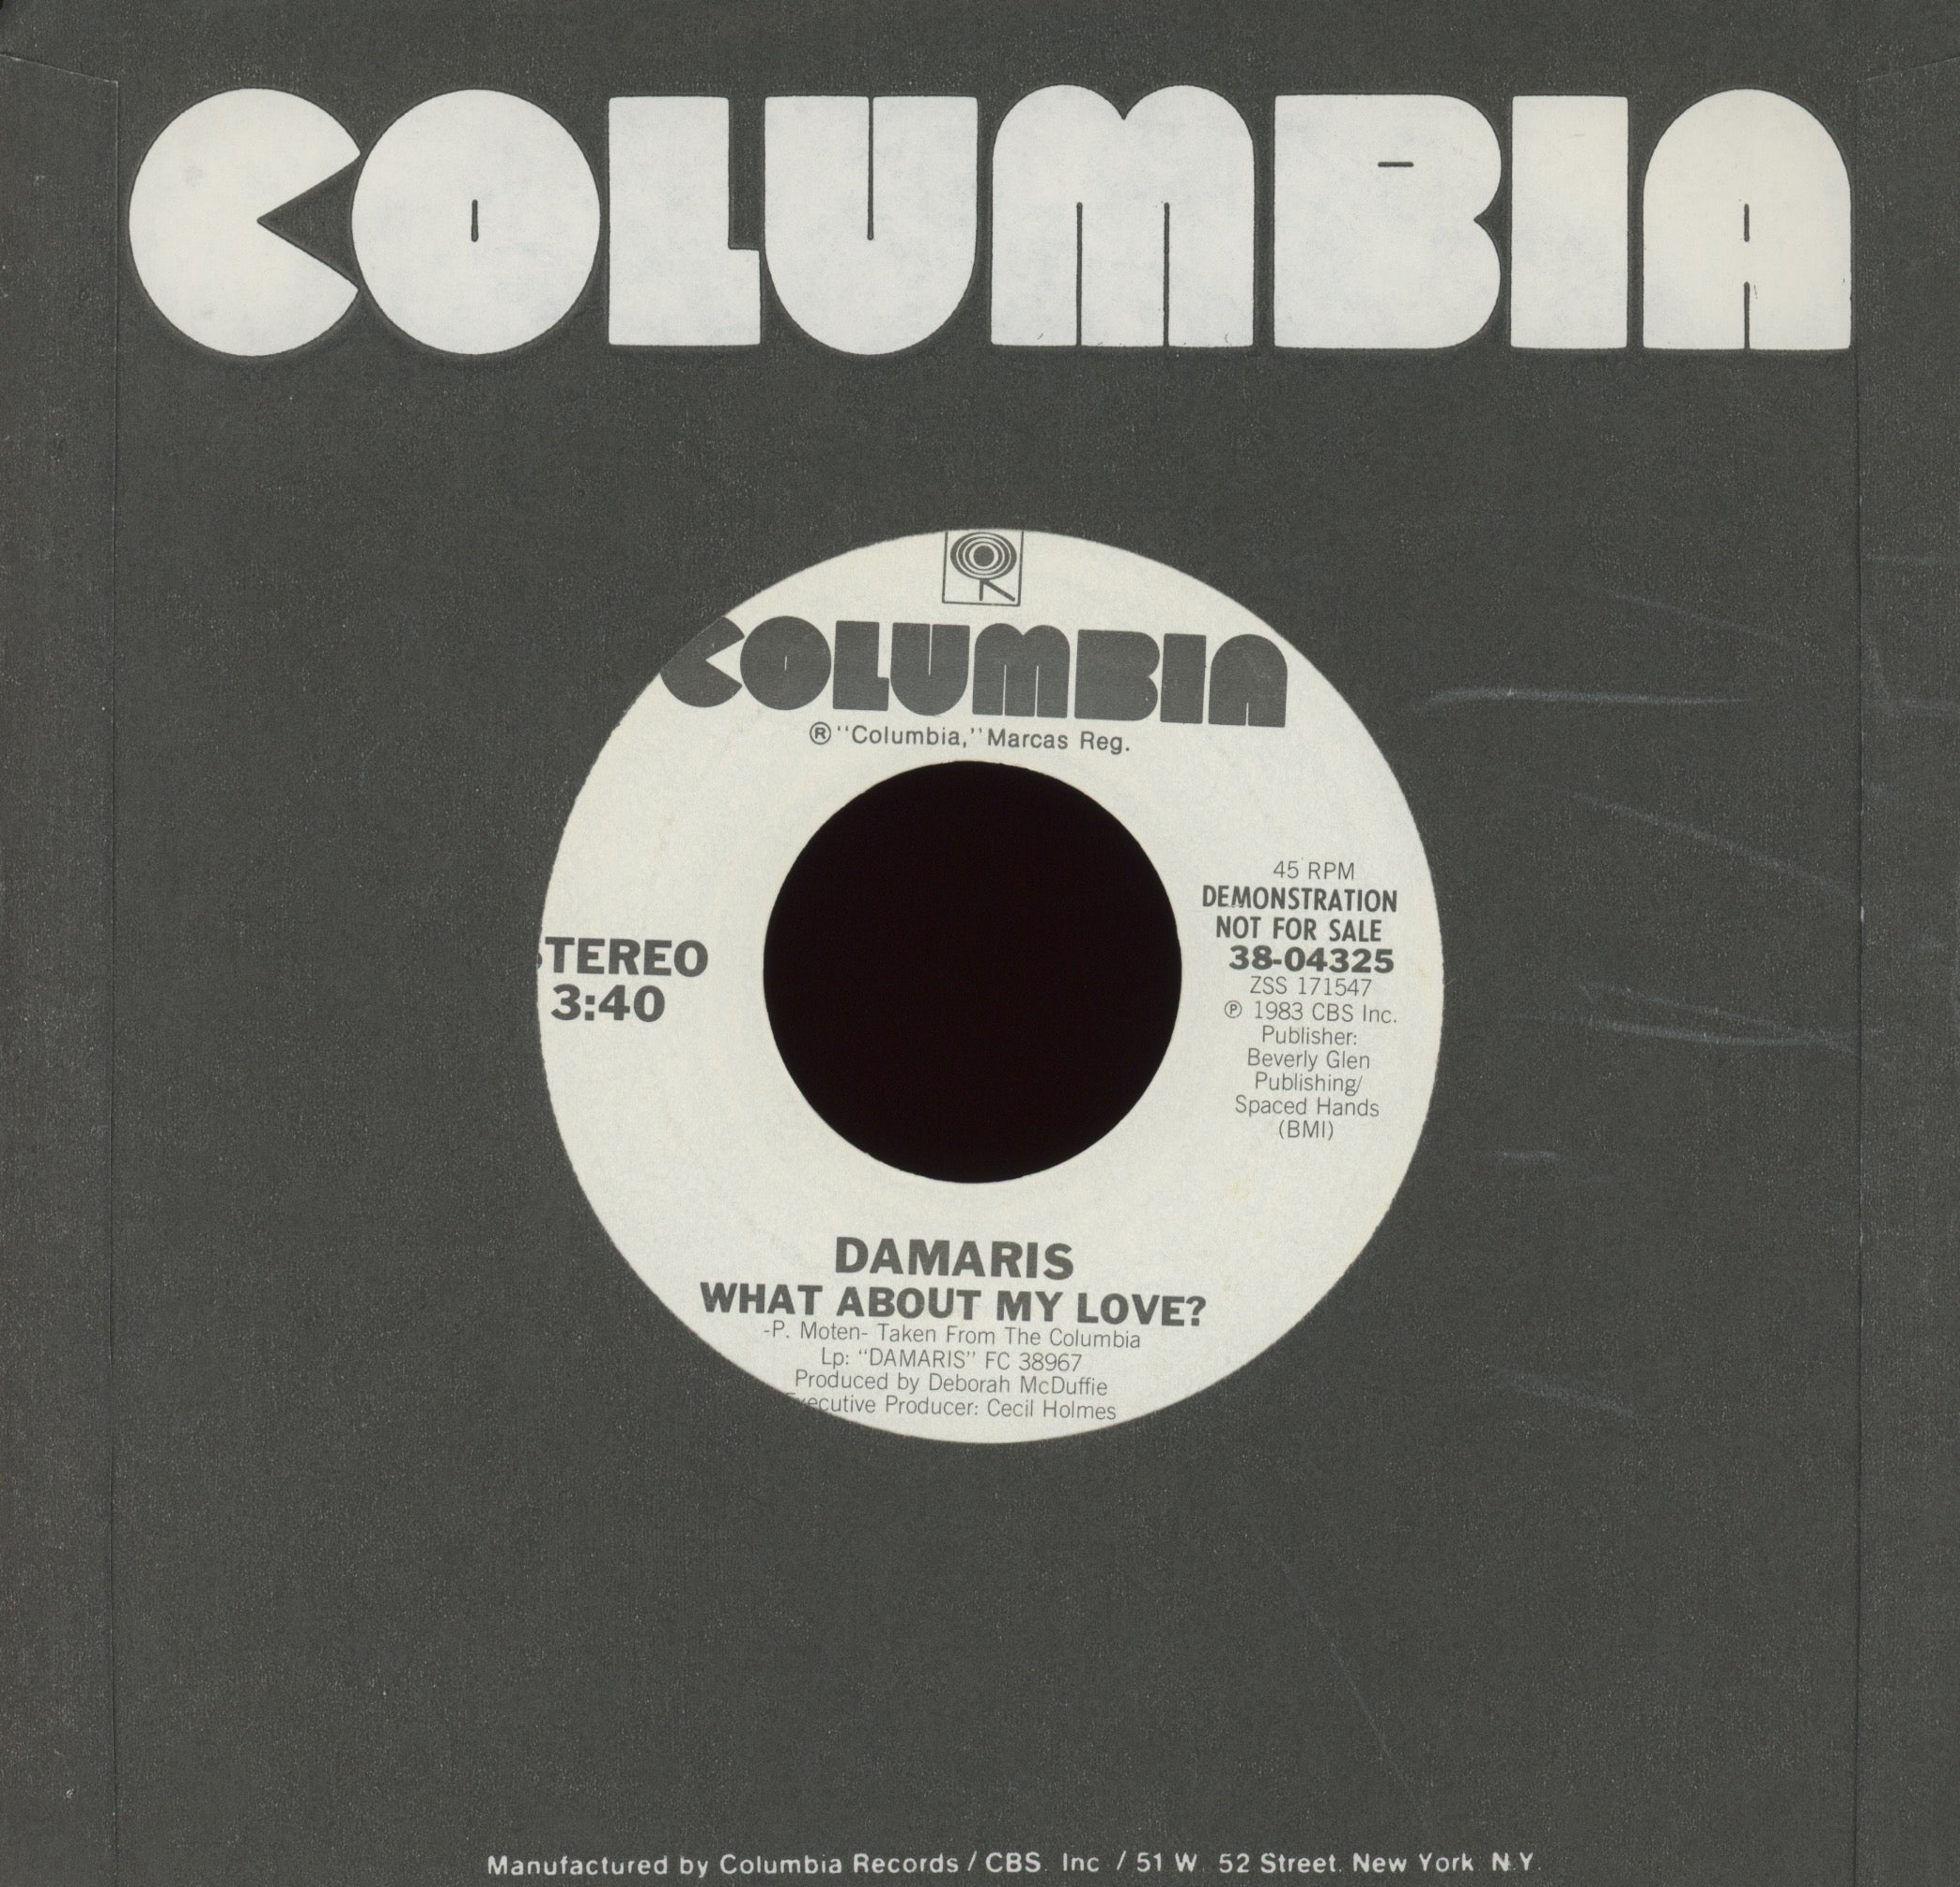 Damaris Carbaugh - What About My Love? on Columbia Promo